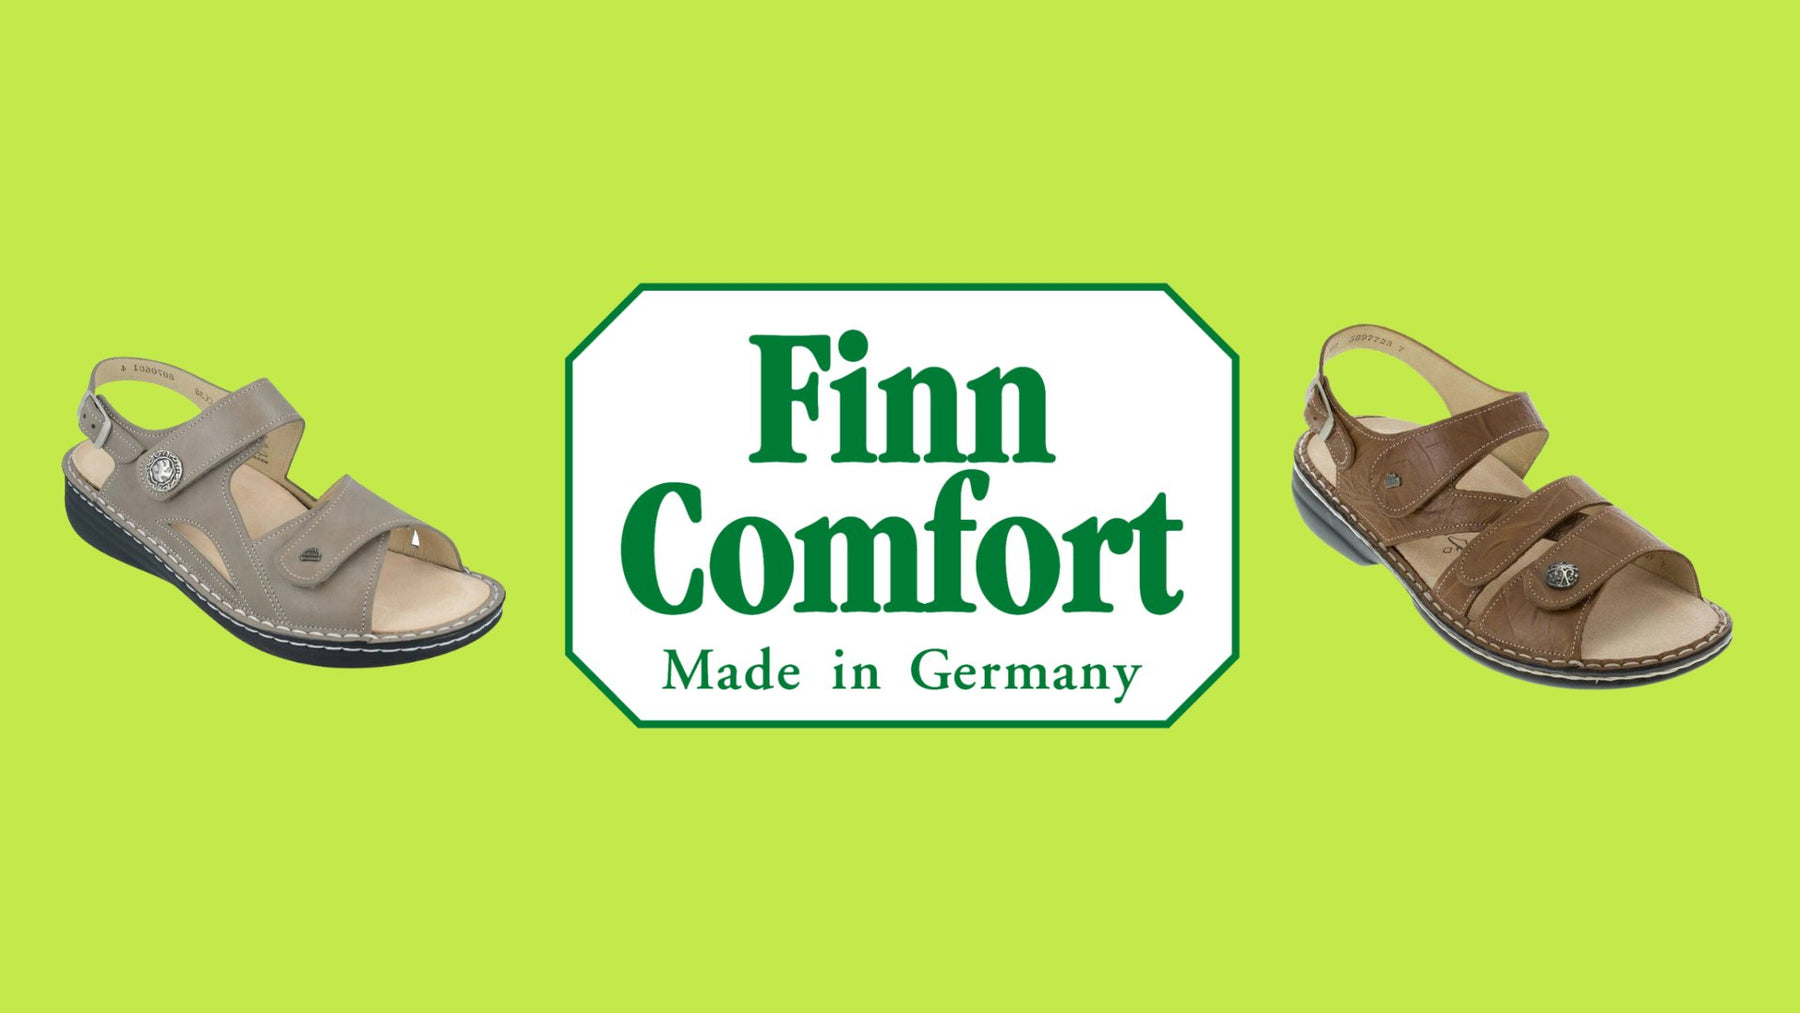 Foot Comfort and Arch Support with Finn Comfort - COMFORTWIZ